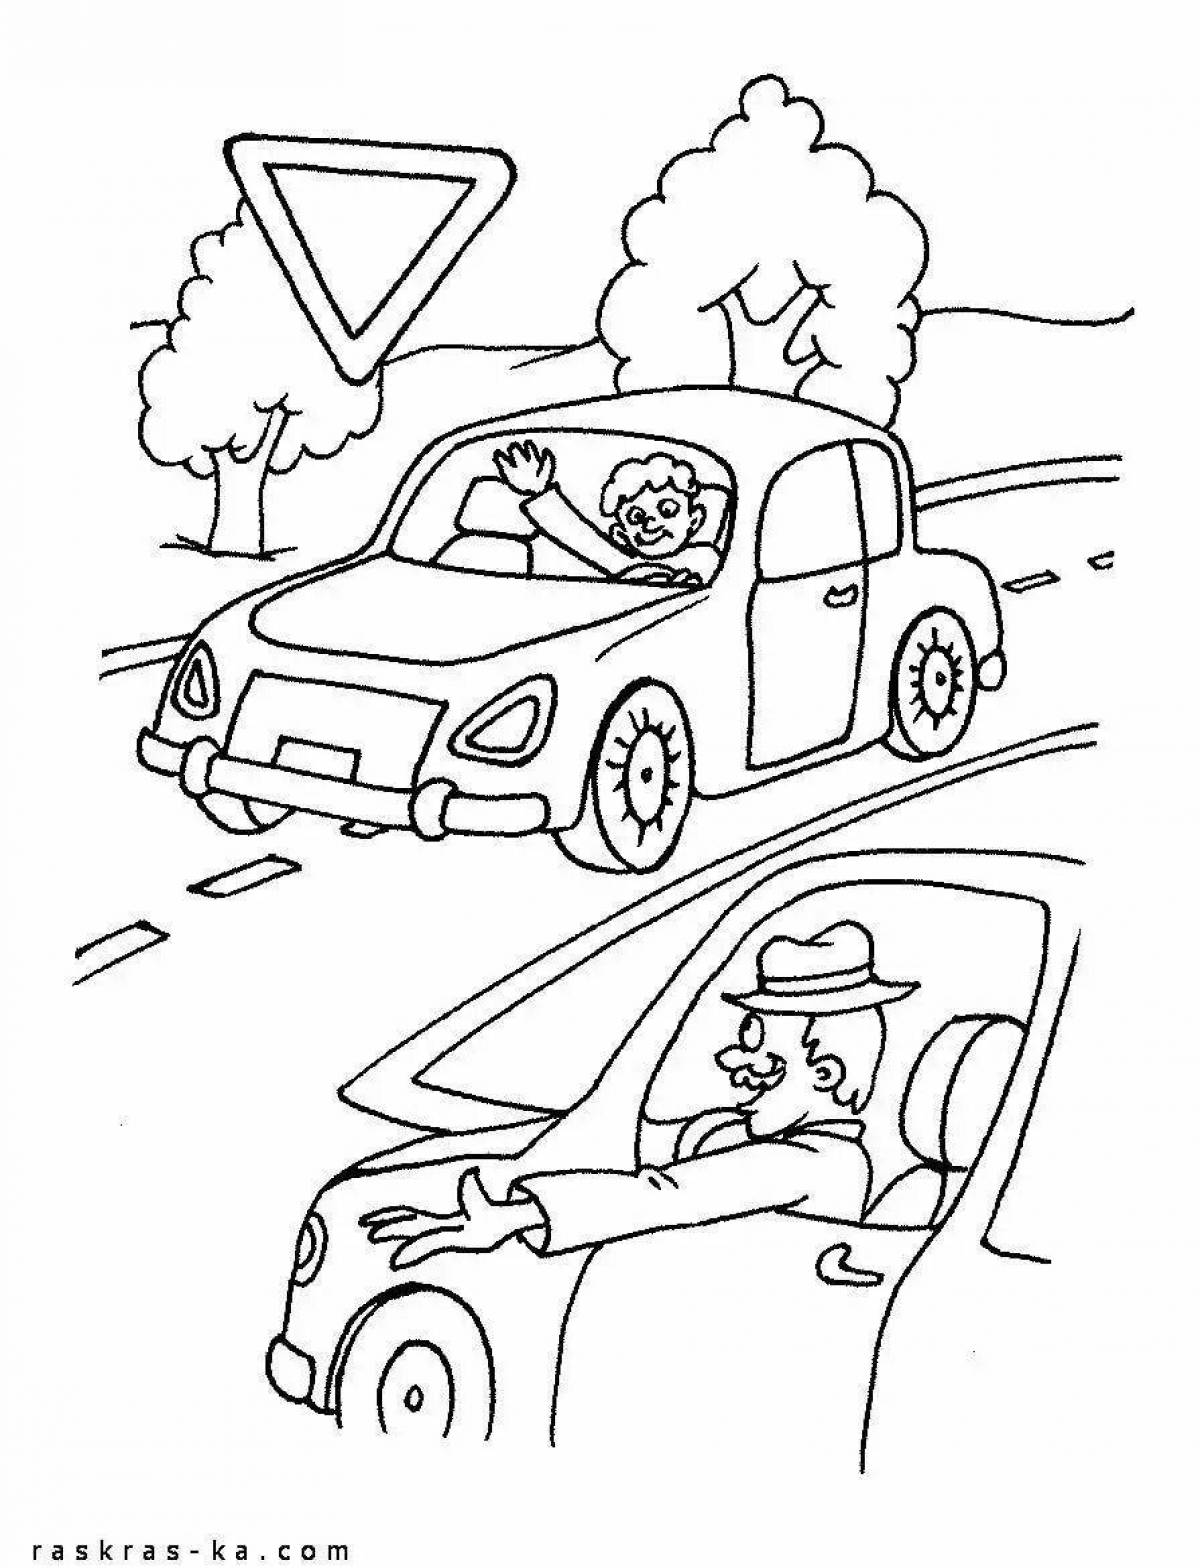 Stimulating traffic rules coloring book for schoolchildren